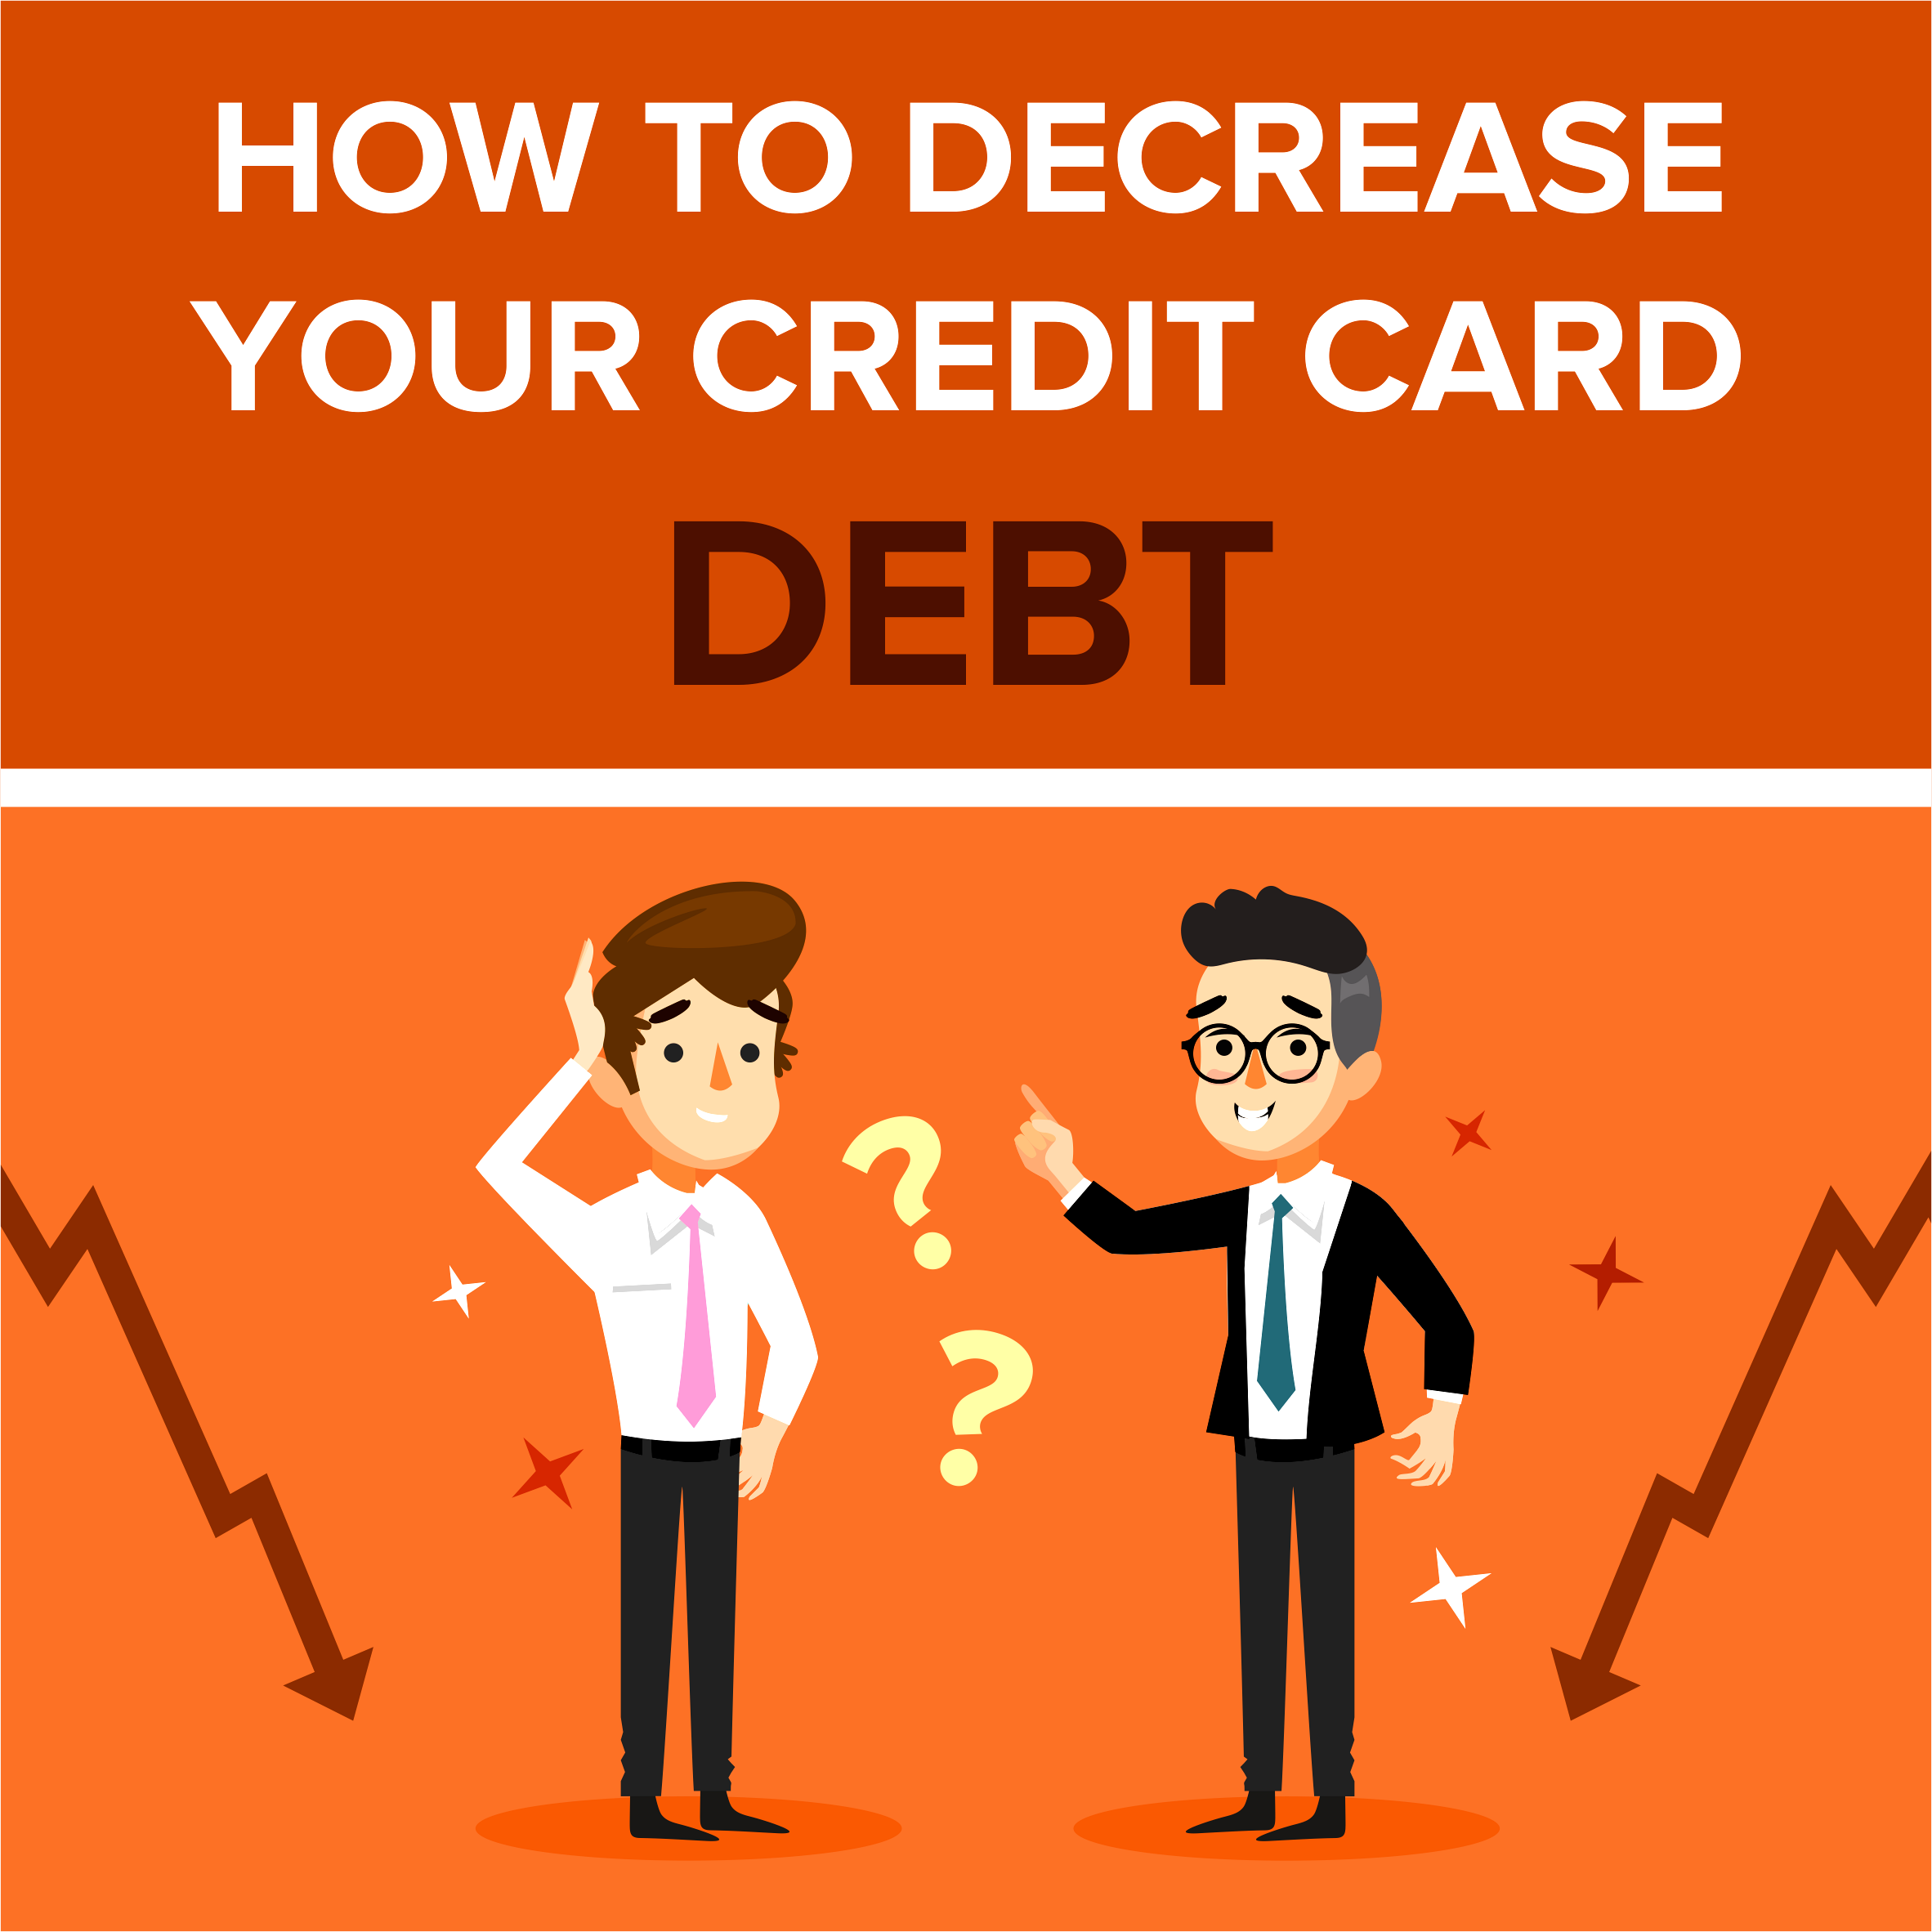 How to Decrease Your Credit Card Debt